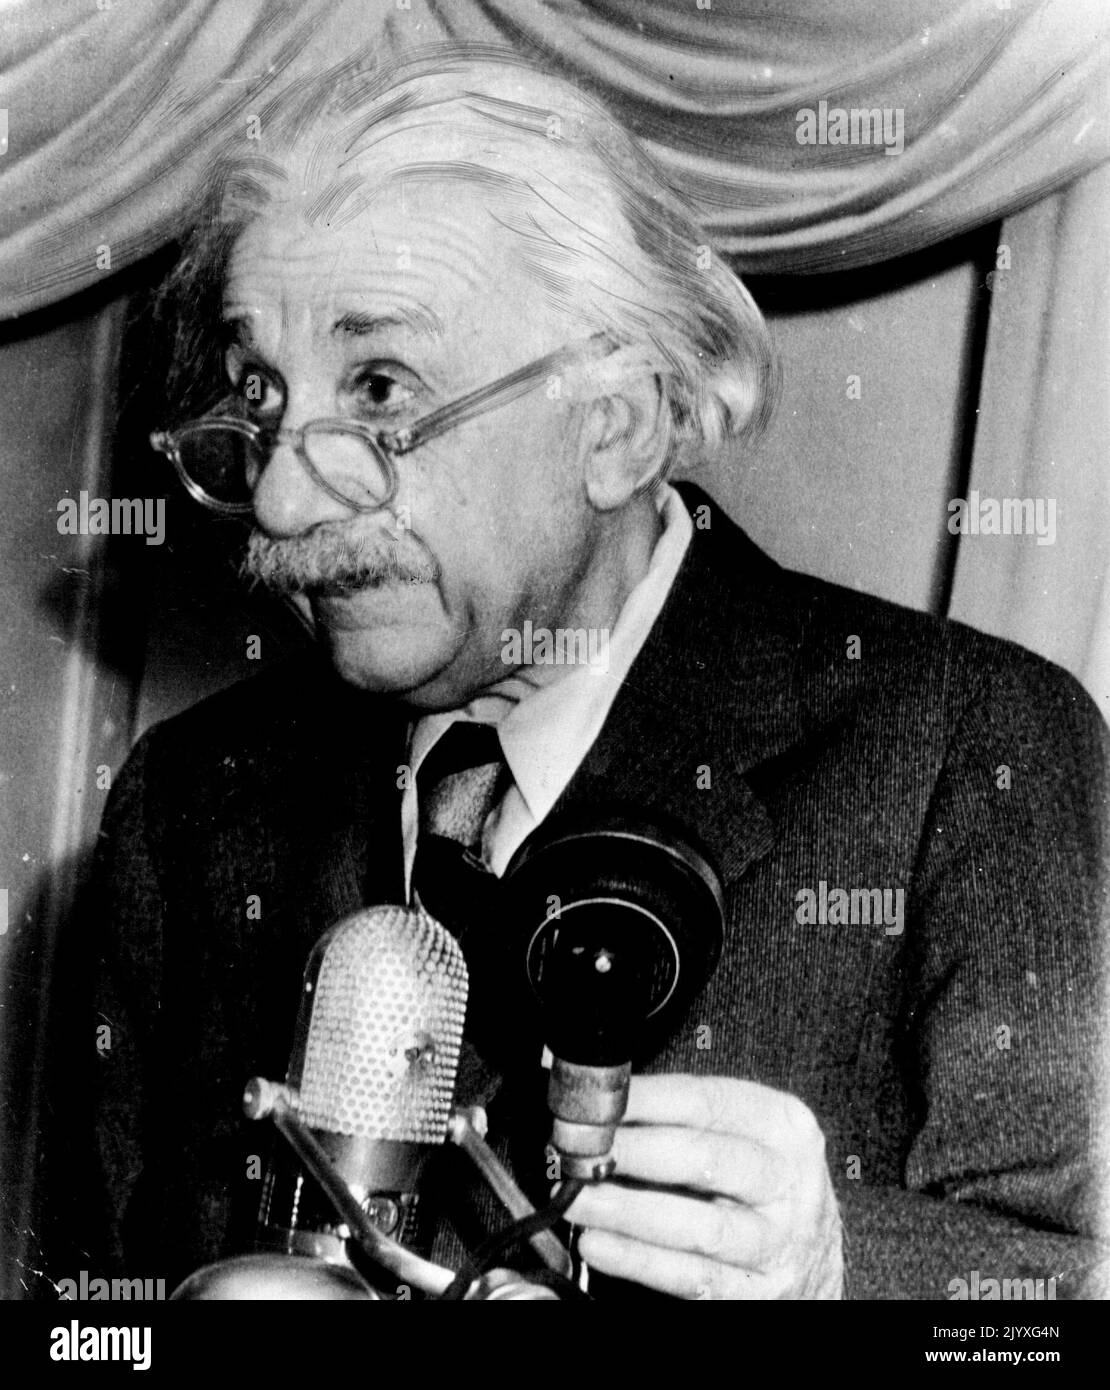 Einstein Urges Educational Support -- Dr. Albert Einstein, famed theoretical physicist making one of his rare public appearances, speaks to 300 Jewish community leaders of the U.S. and Canada at Nassau Tavern here tonight. He urged support for schools of higher learning in Israel as institutions where Jews will always be welcome. Meeting was the first national conference of the American Committee for the Hebrew University, Weizmann Institute of Science, and *****. May 10, 1950. (Photo by AP Wirephoto). Stock Photo